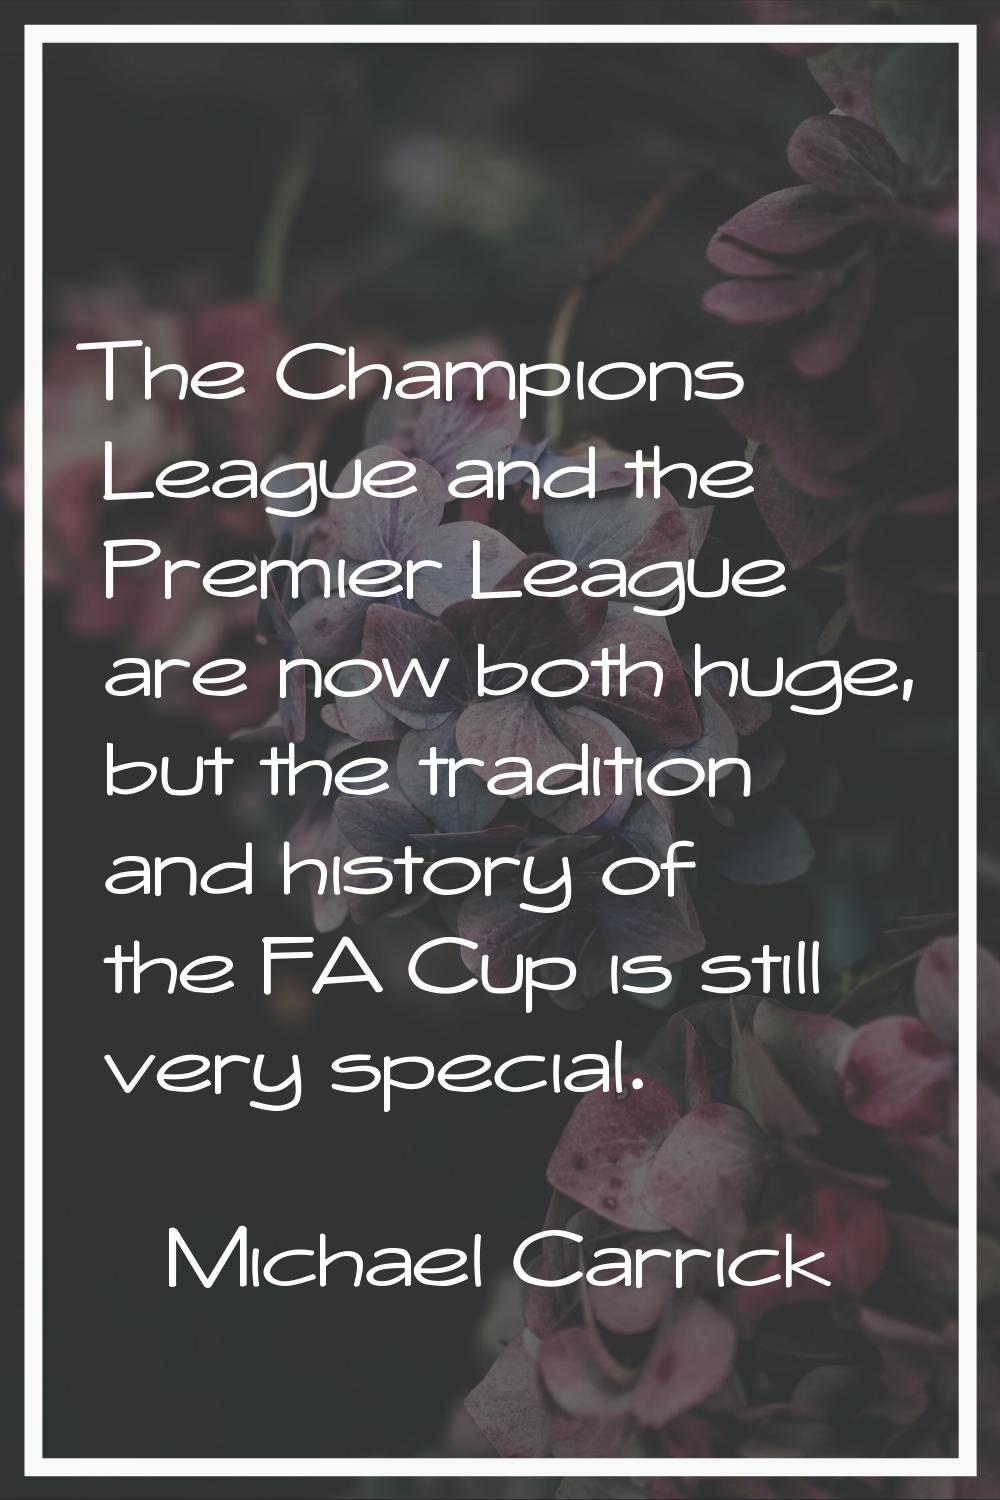 The Champions League and the Premier League are now both huge, but the tradition and history of the